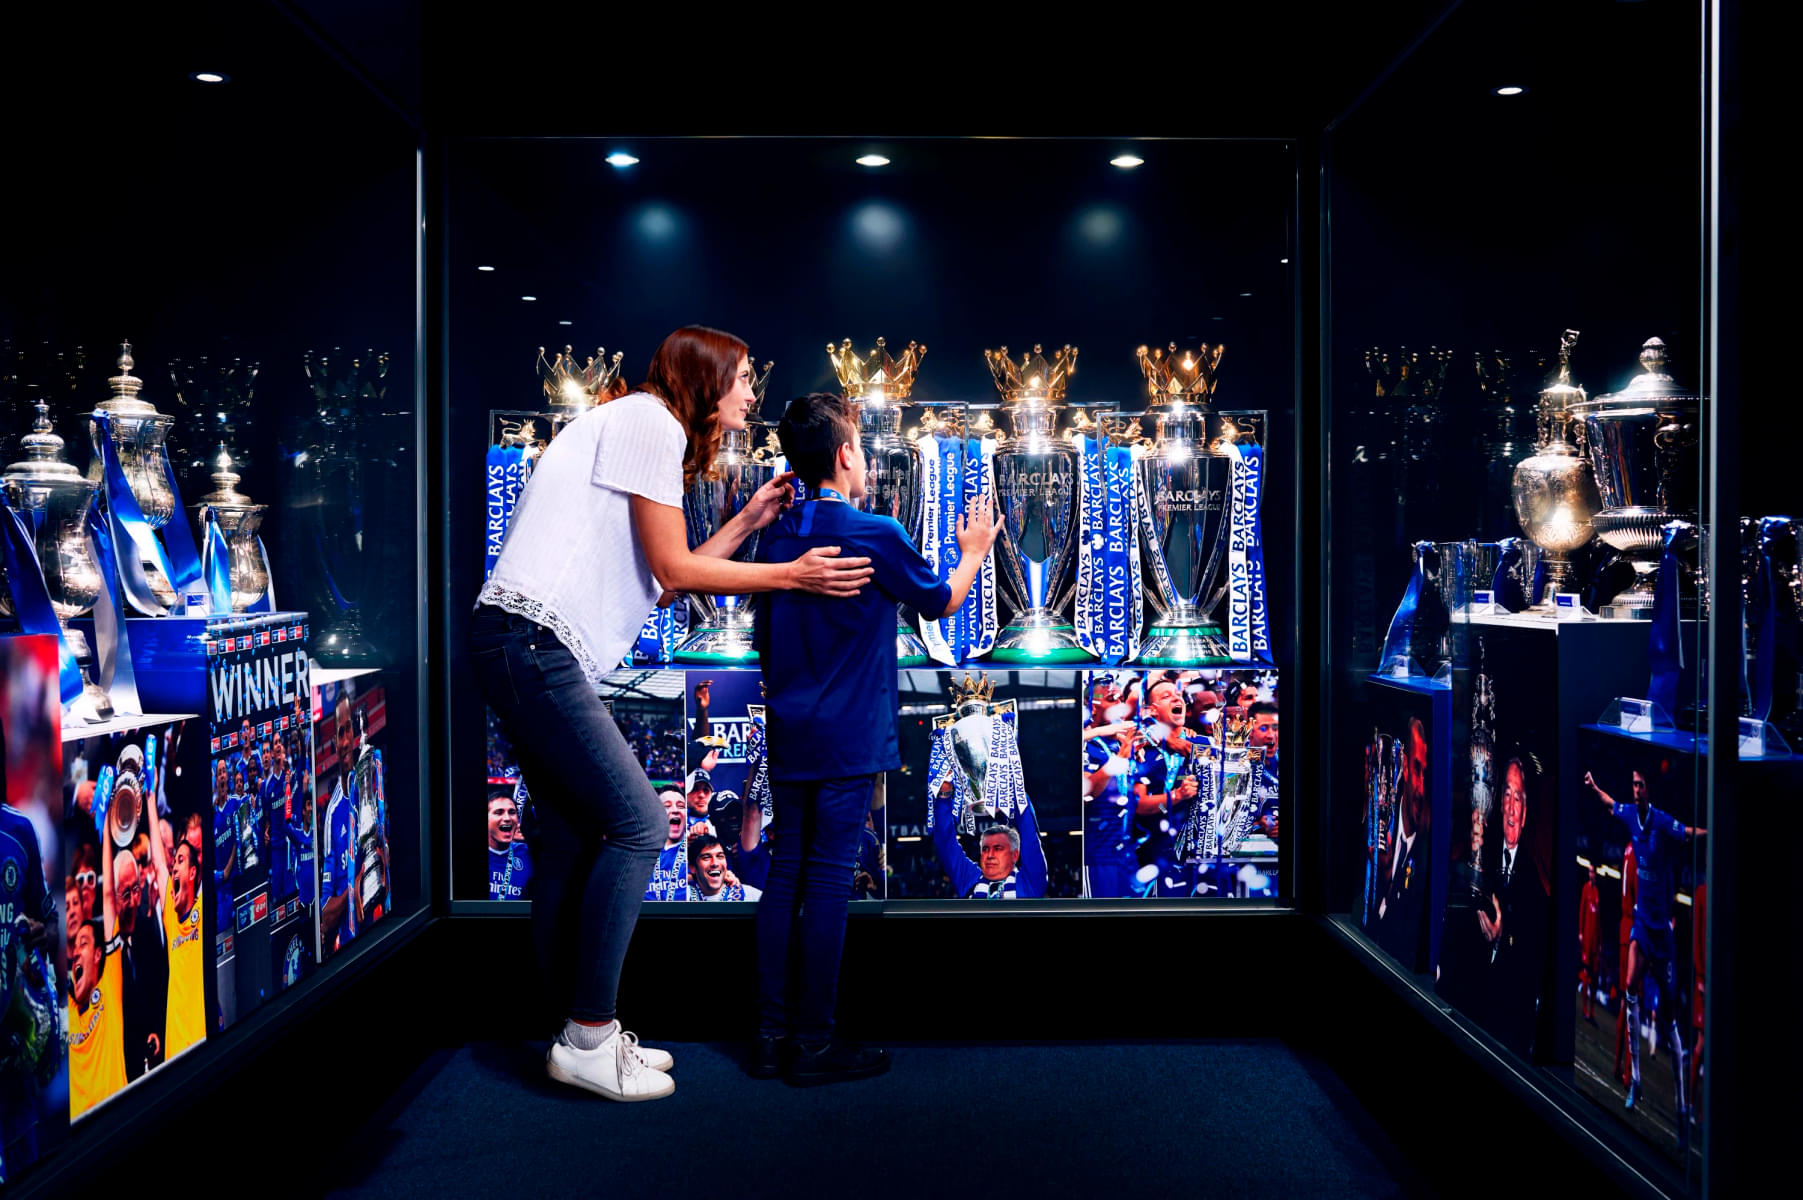 Take a look at the gorgeous trophy cabinet